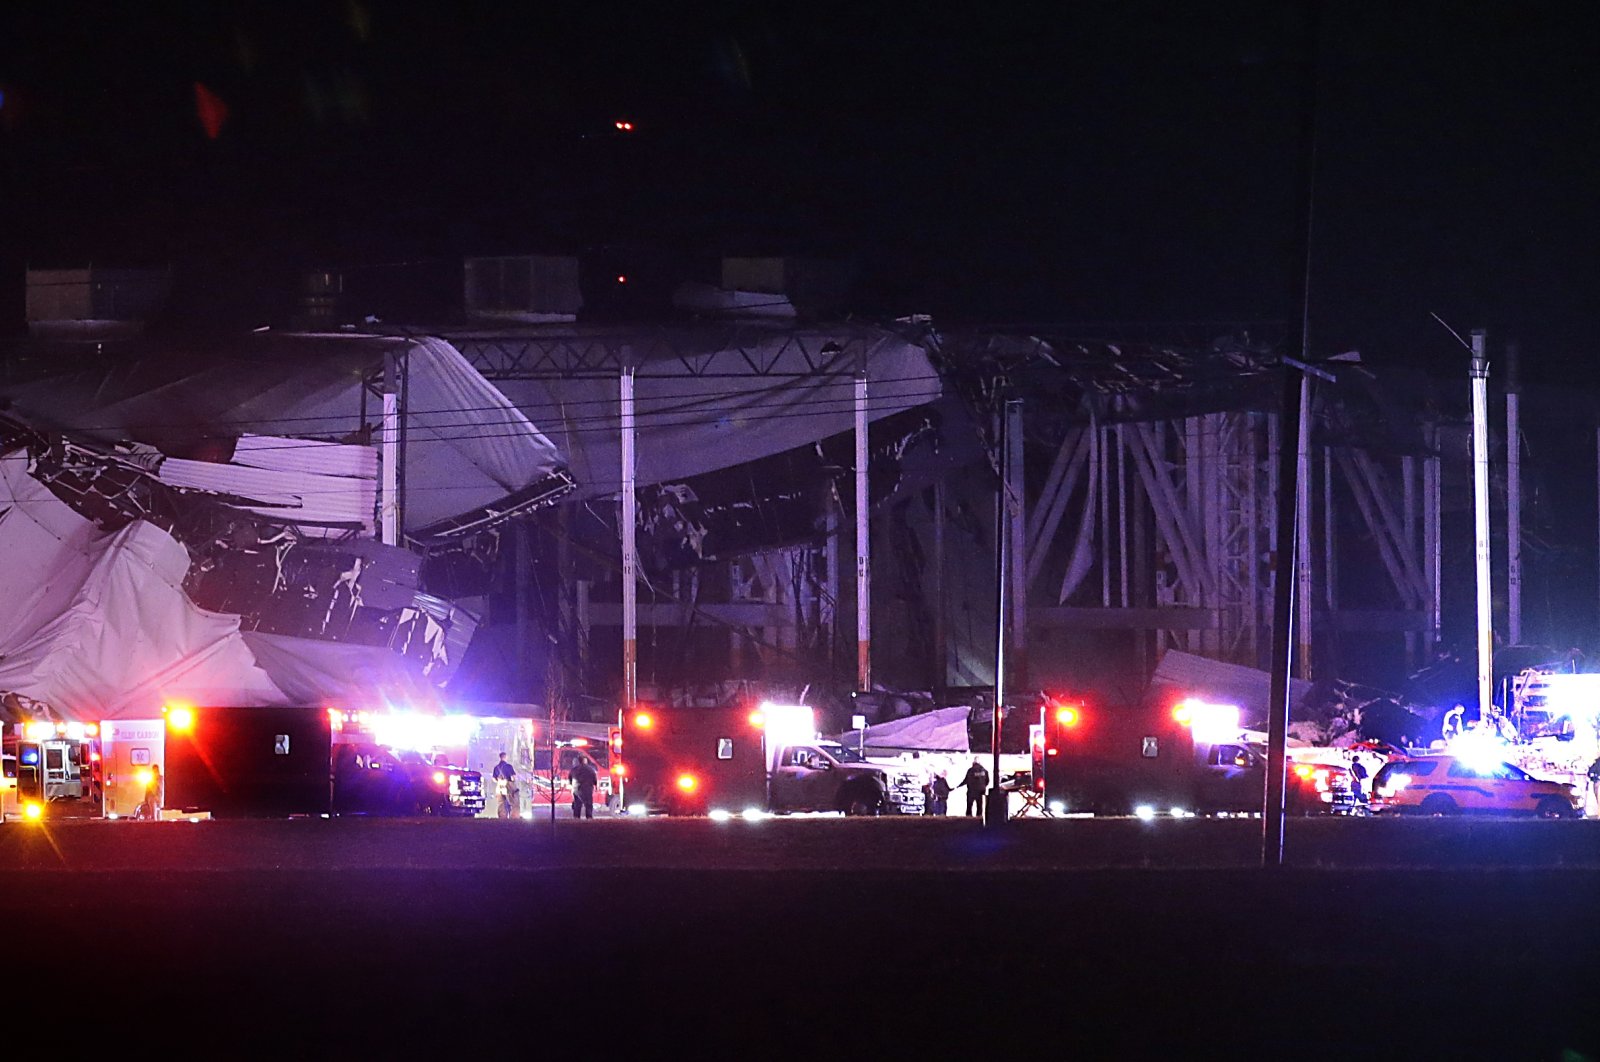 An Amazon distribution center is partially collapsed after being hit by a tornado, Edwardsville, Illinois, U.S., Dec. 10, 2021. (Robert Cohen/St. Louis Post-Dispatch via AP)